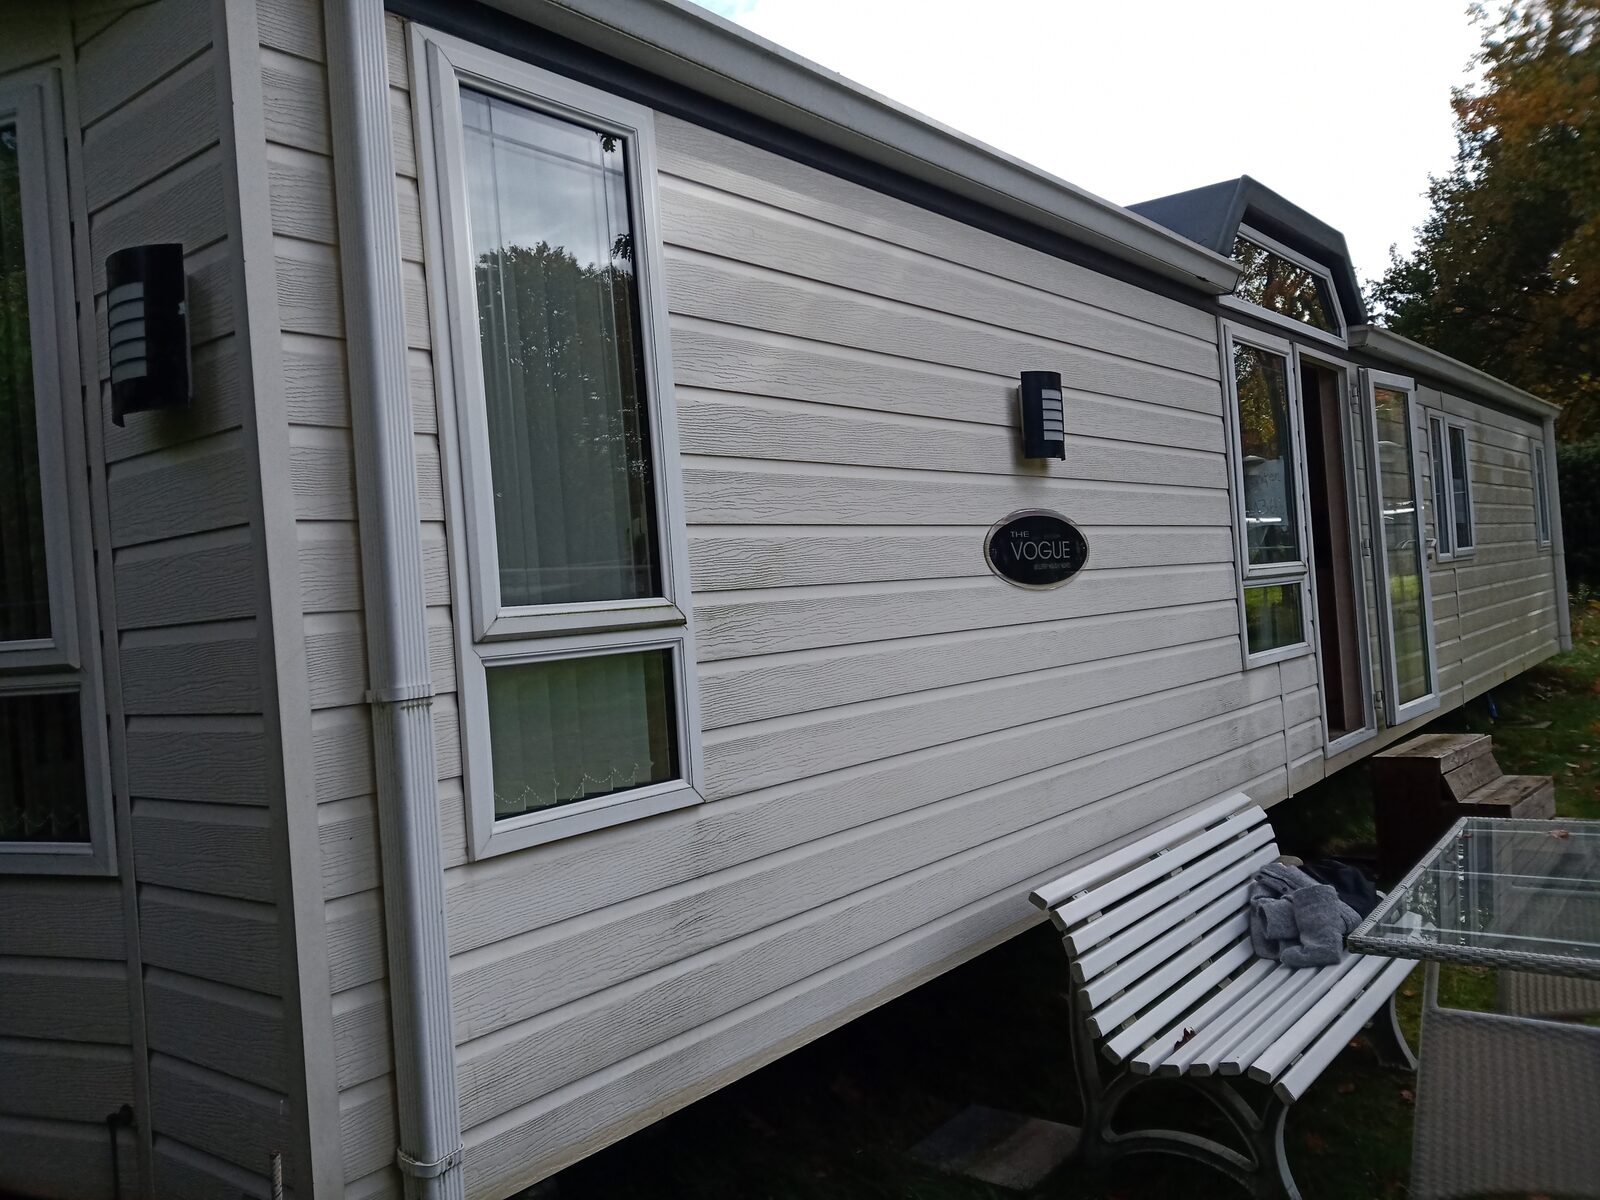 Willerby Holiday Homes 'The Vogue'